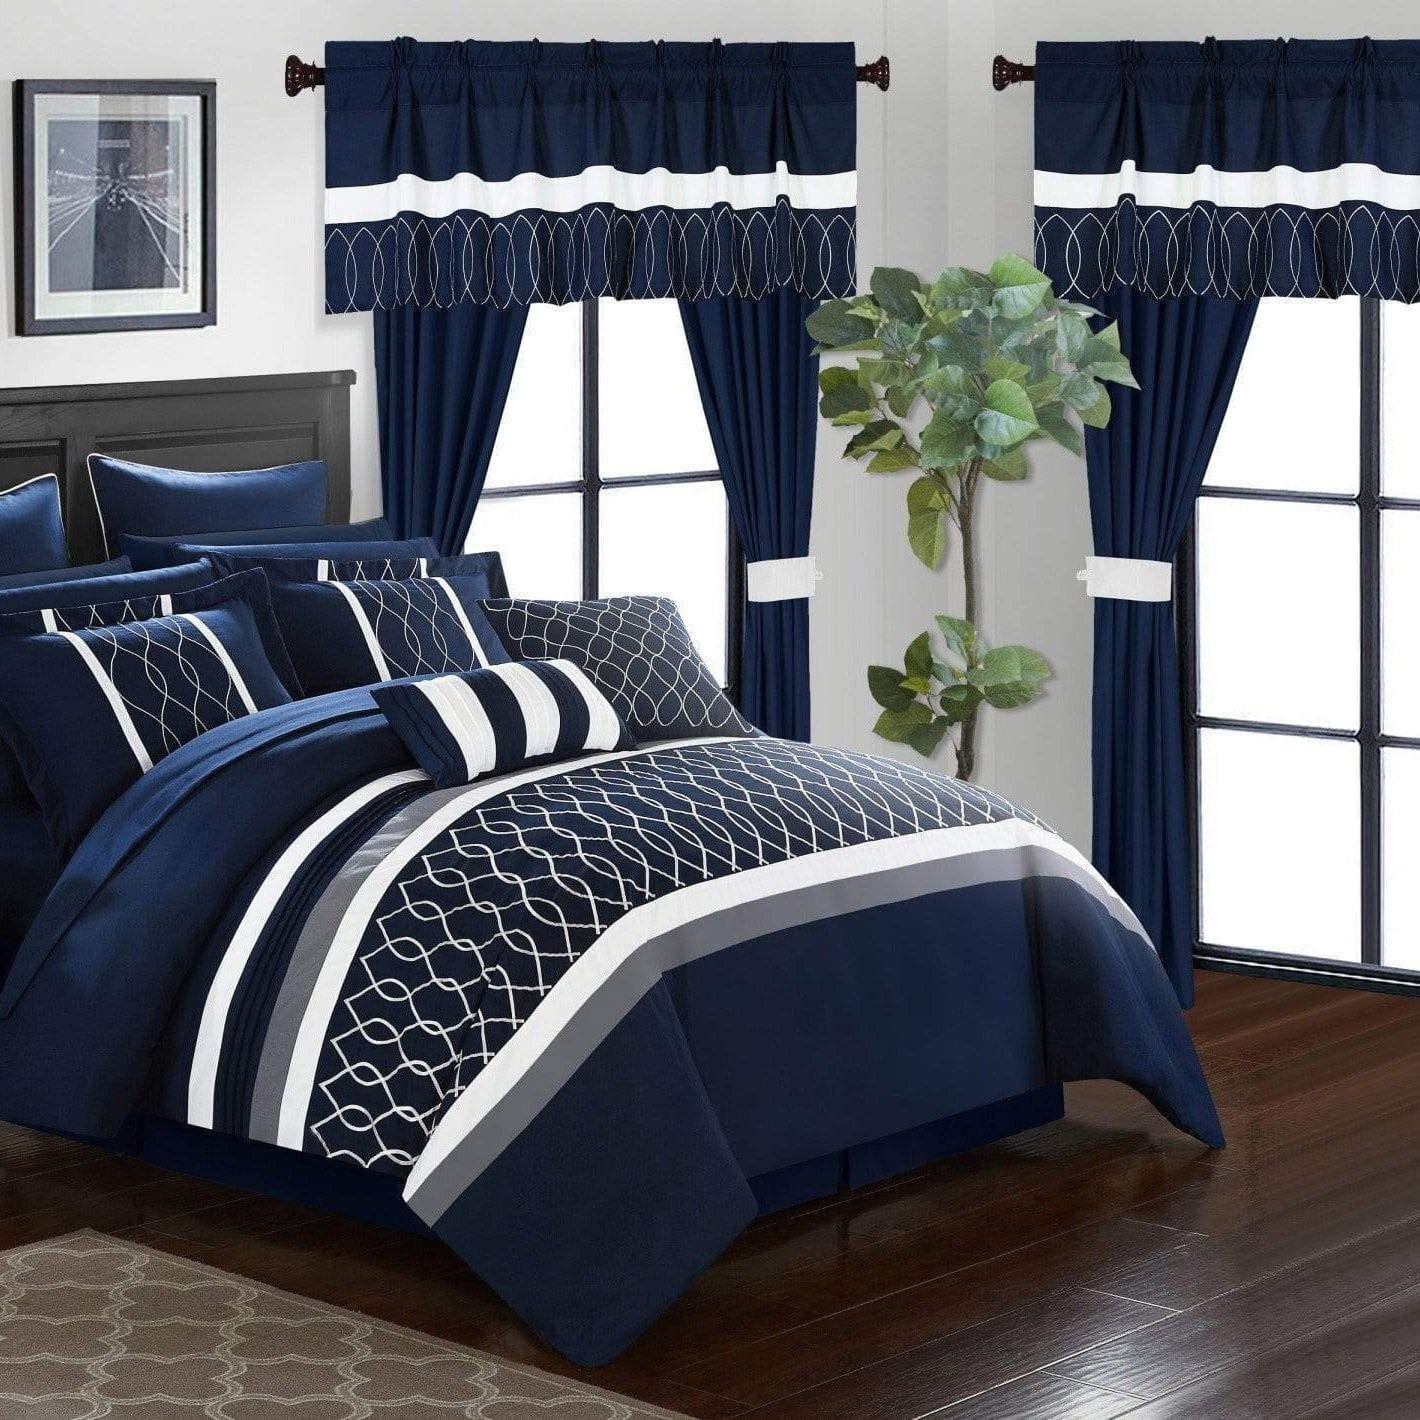 Chic Home Dinah 24 Piece Pleated Ruffled Comforter Set Bedding